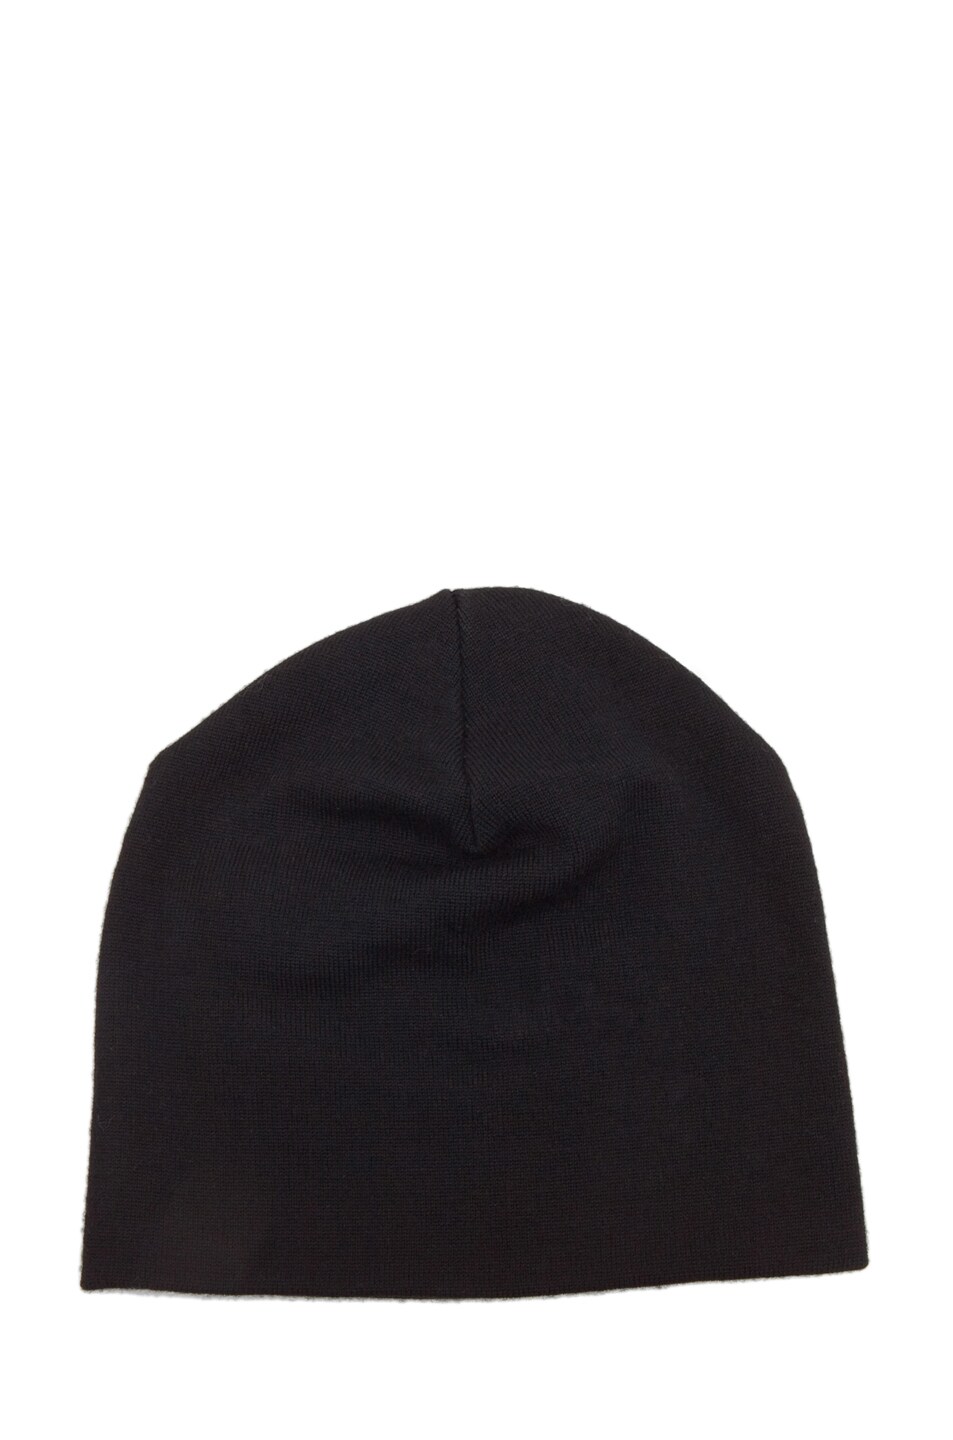 Image 1 of SILENT DAMIR DOMA Kyside Beanie in Onyx